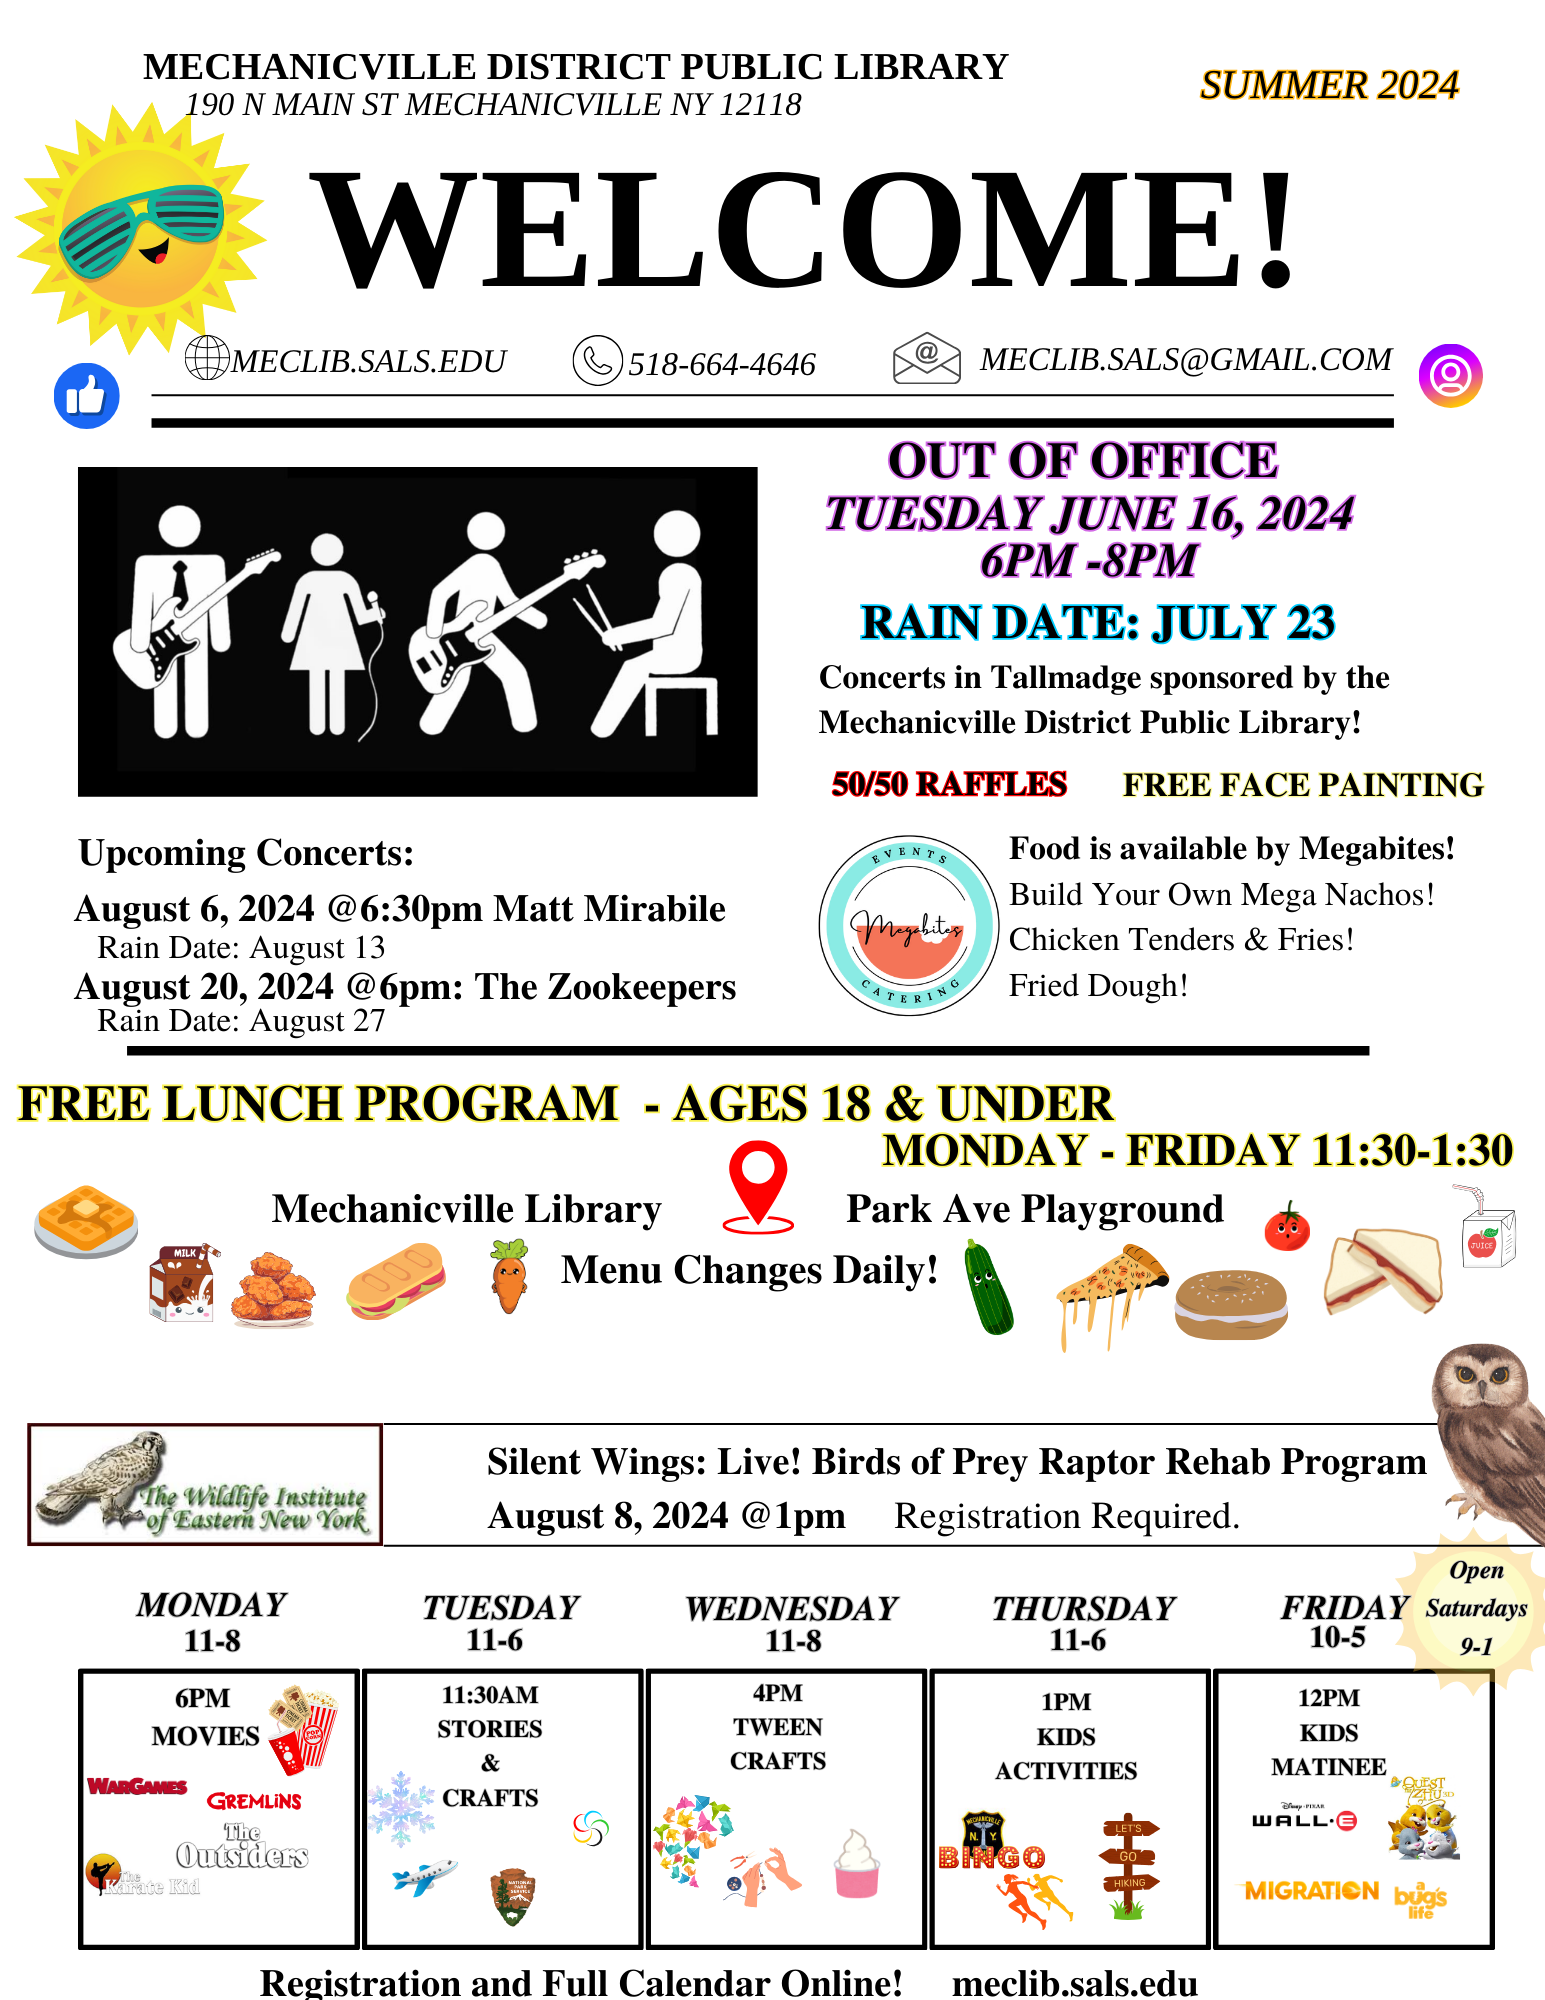 Mechanicville Library free summer concert series: out of office 